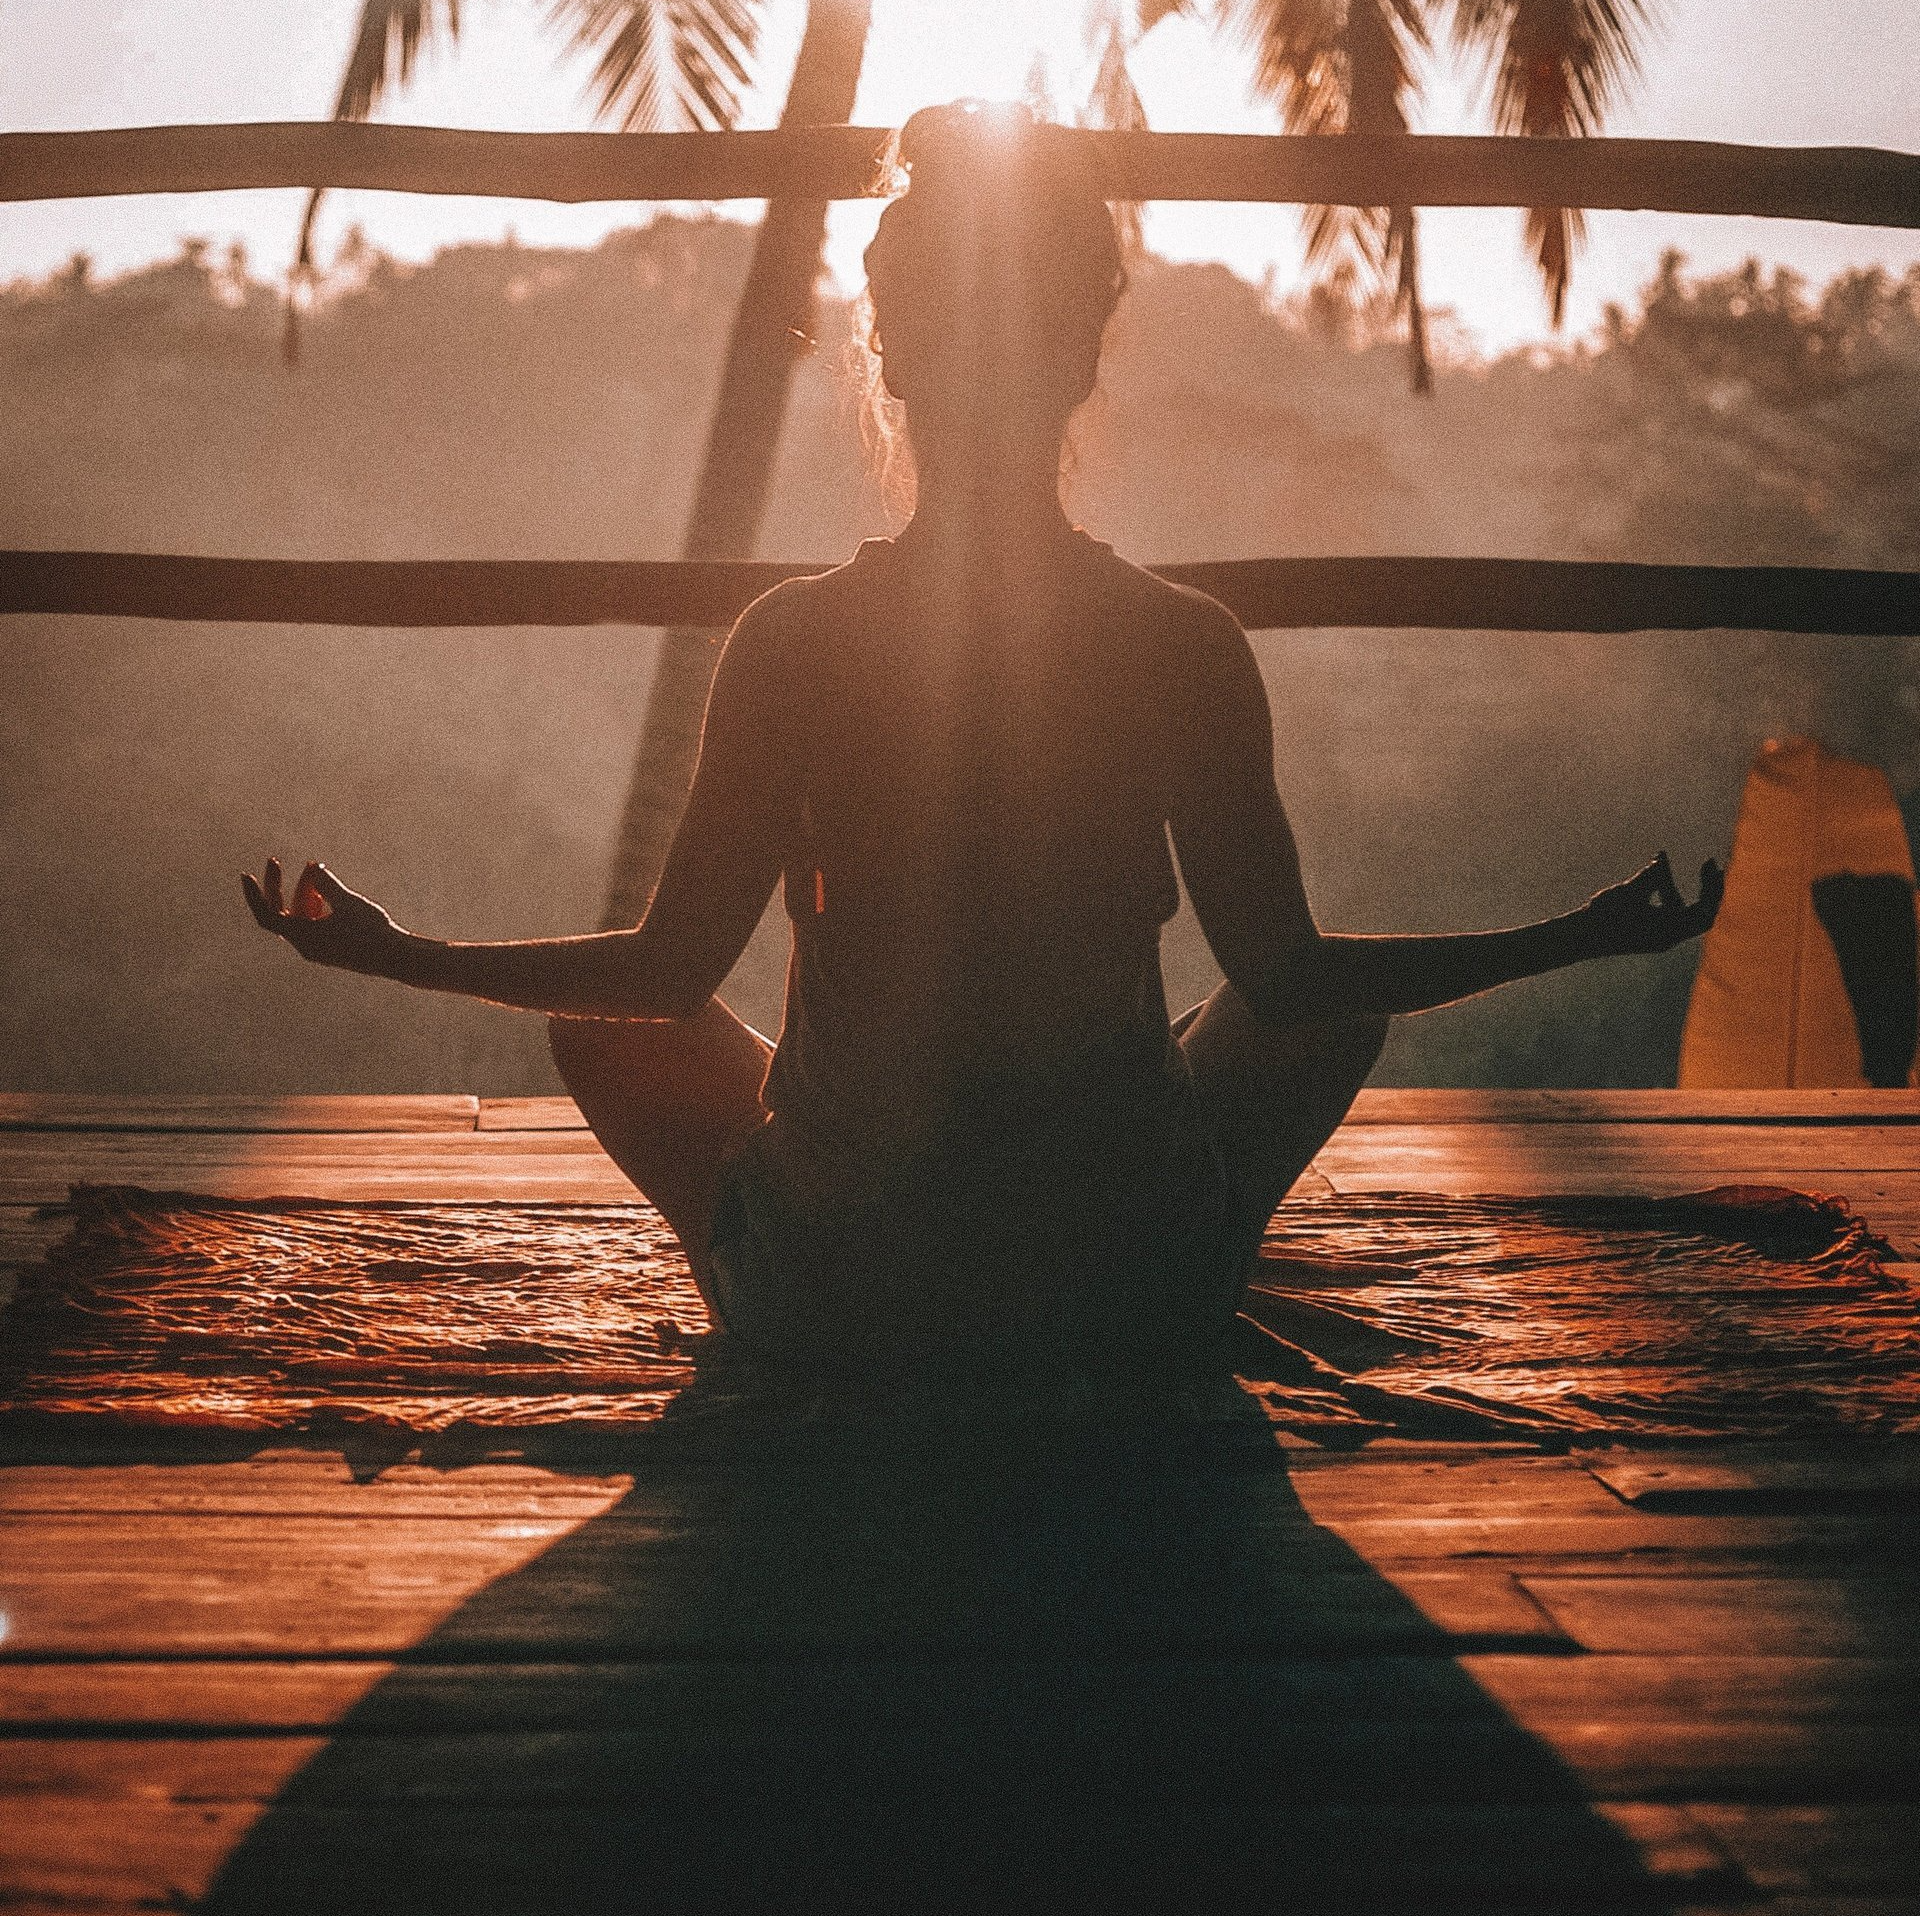 A woman sits in a lotus position on a wooden deck at sunset